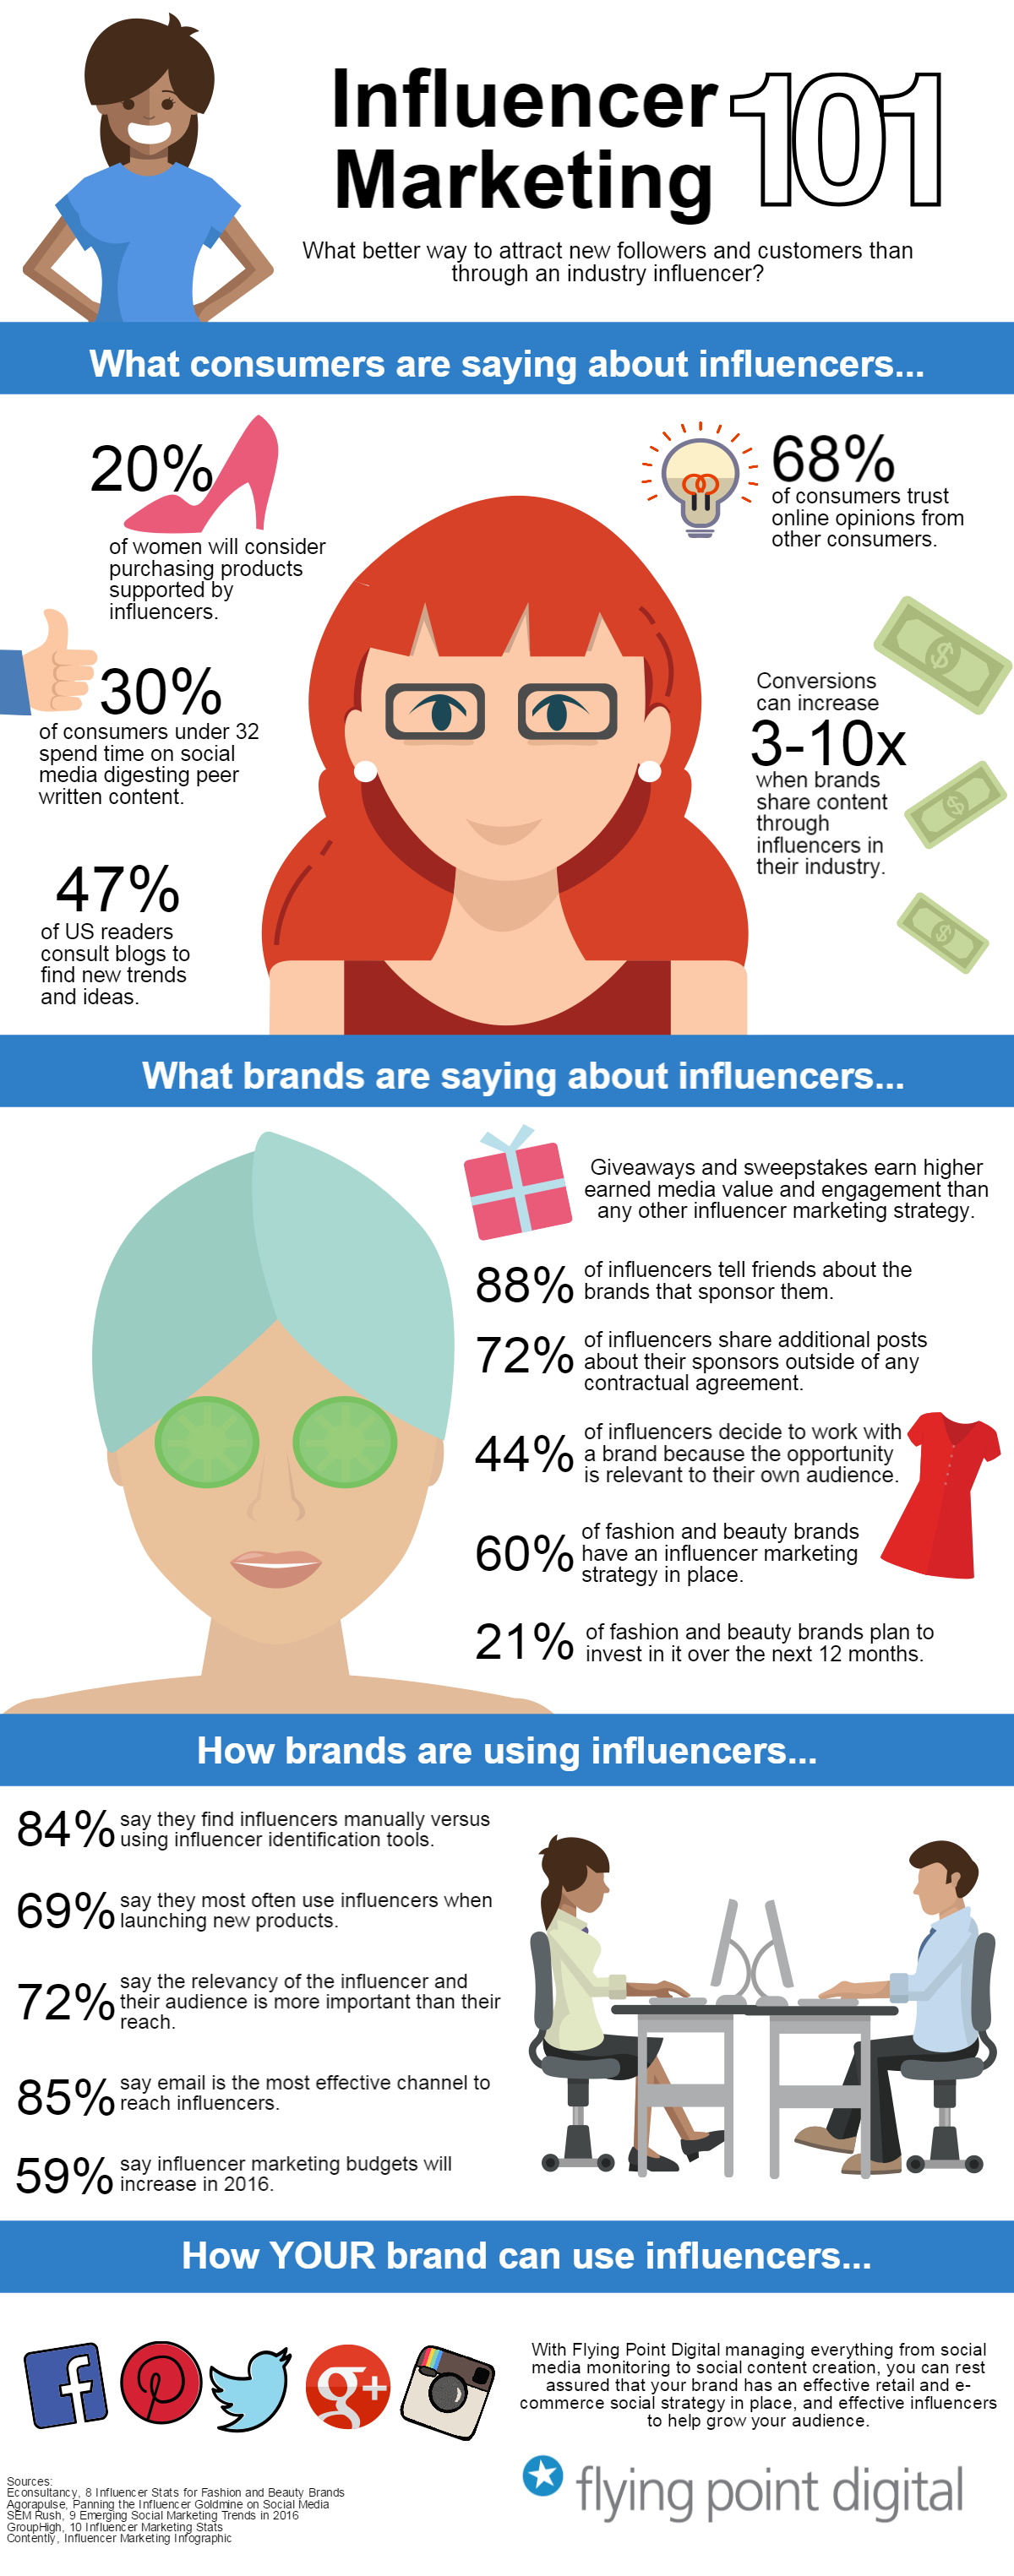 Influencer Marketing 101 Infographic - 2016 strategy tips by Flying Point Digital